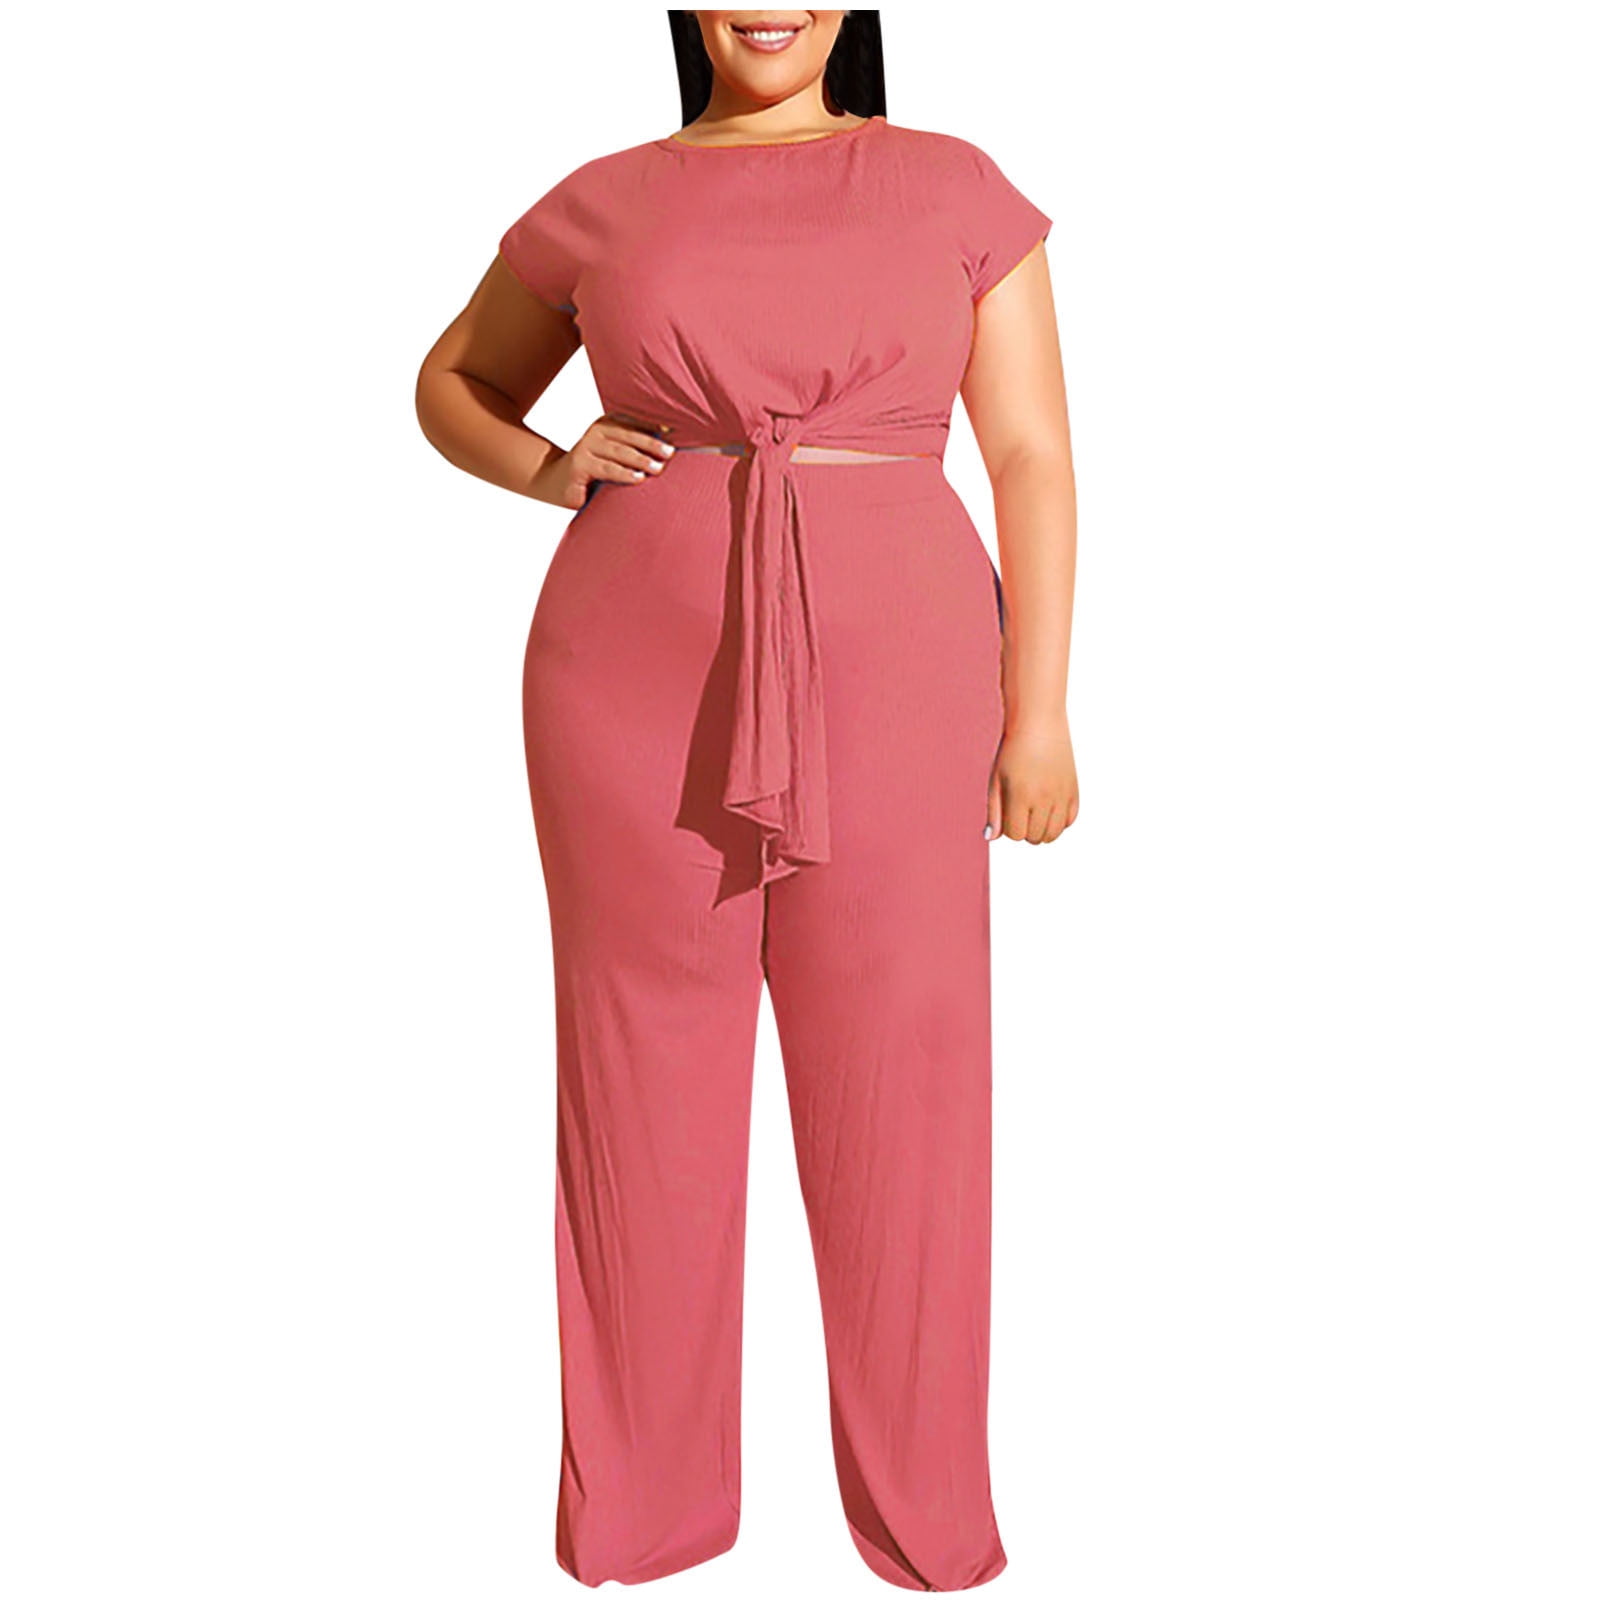 YWDJ Two Piece Outfits for Women Classy Women Plus Size Solid Short Sleeve  O Neck Bandage Pullover Leisure Tops + Long Pants Set Pink XL